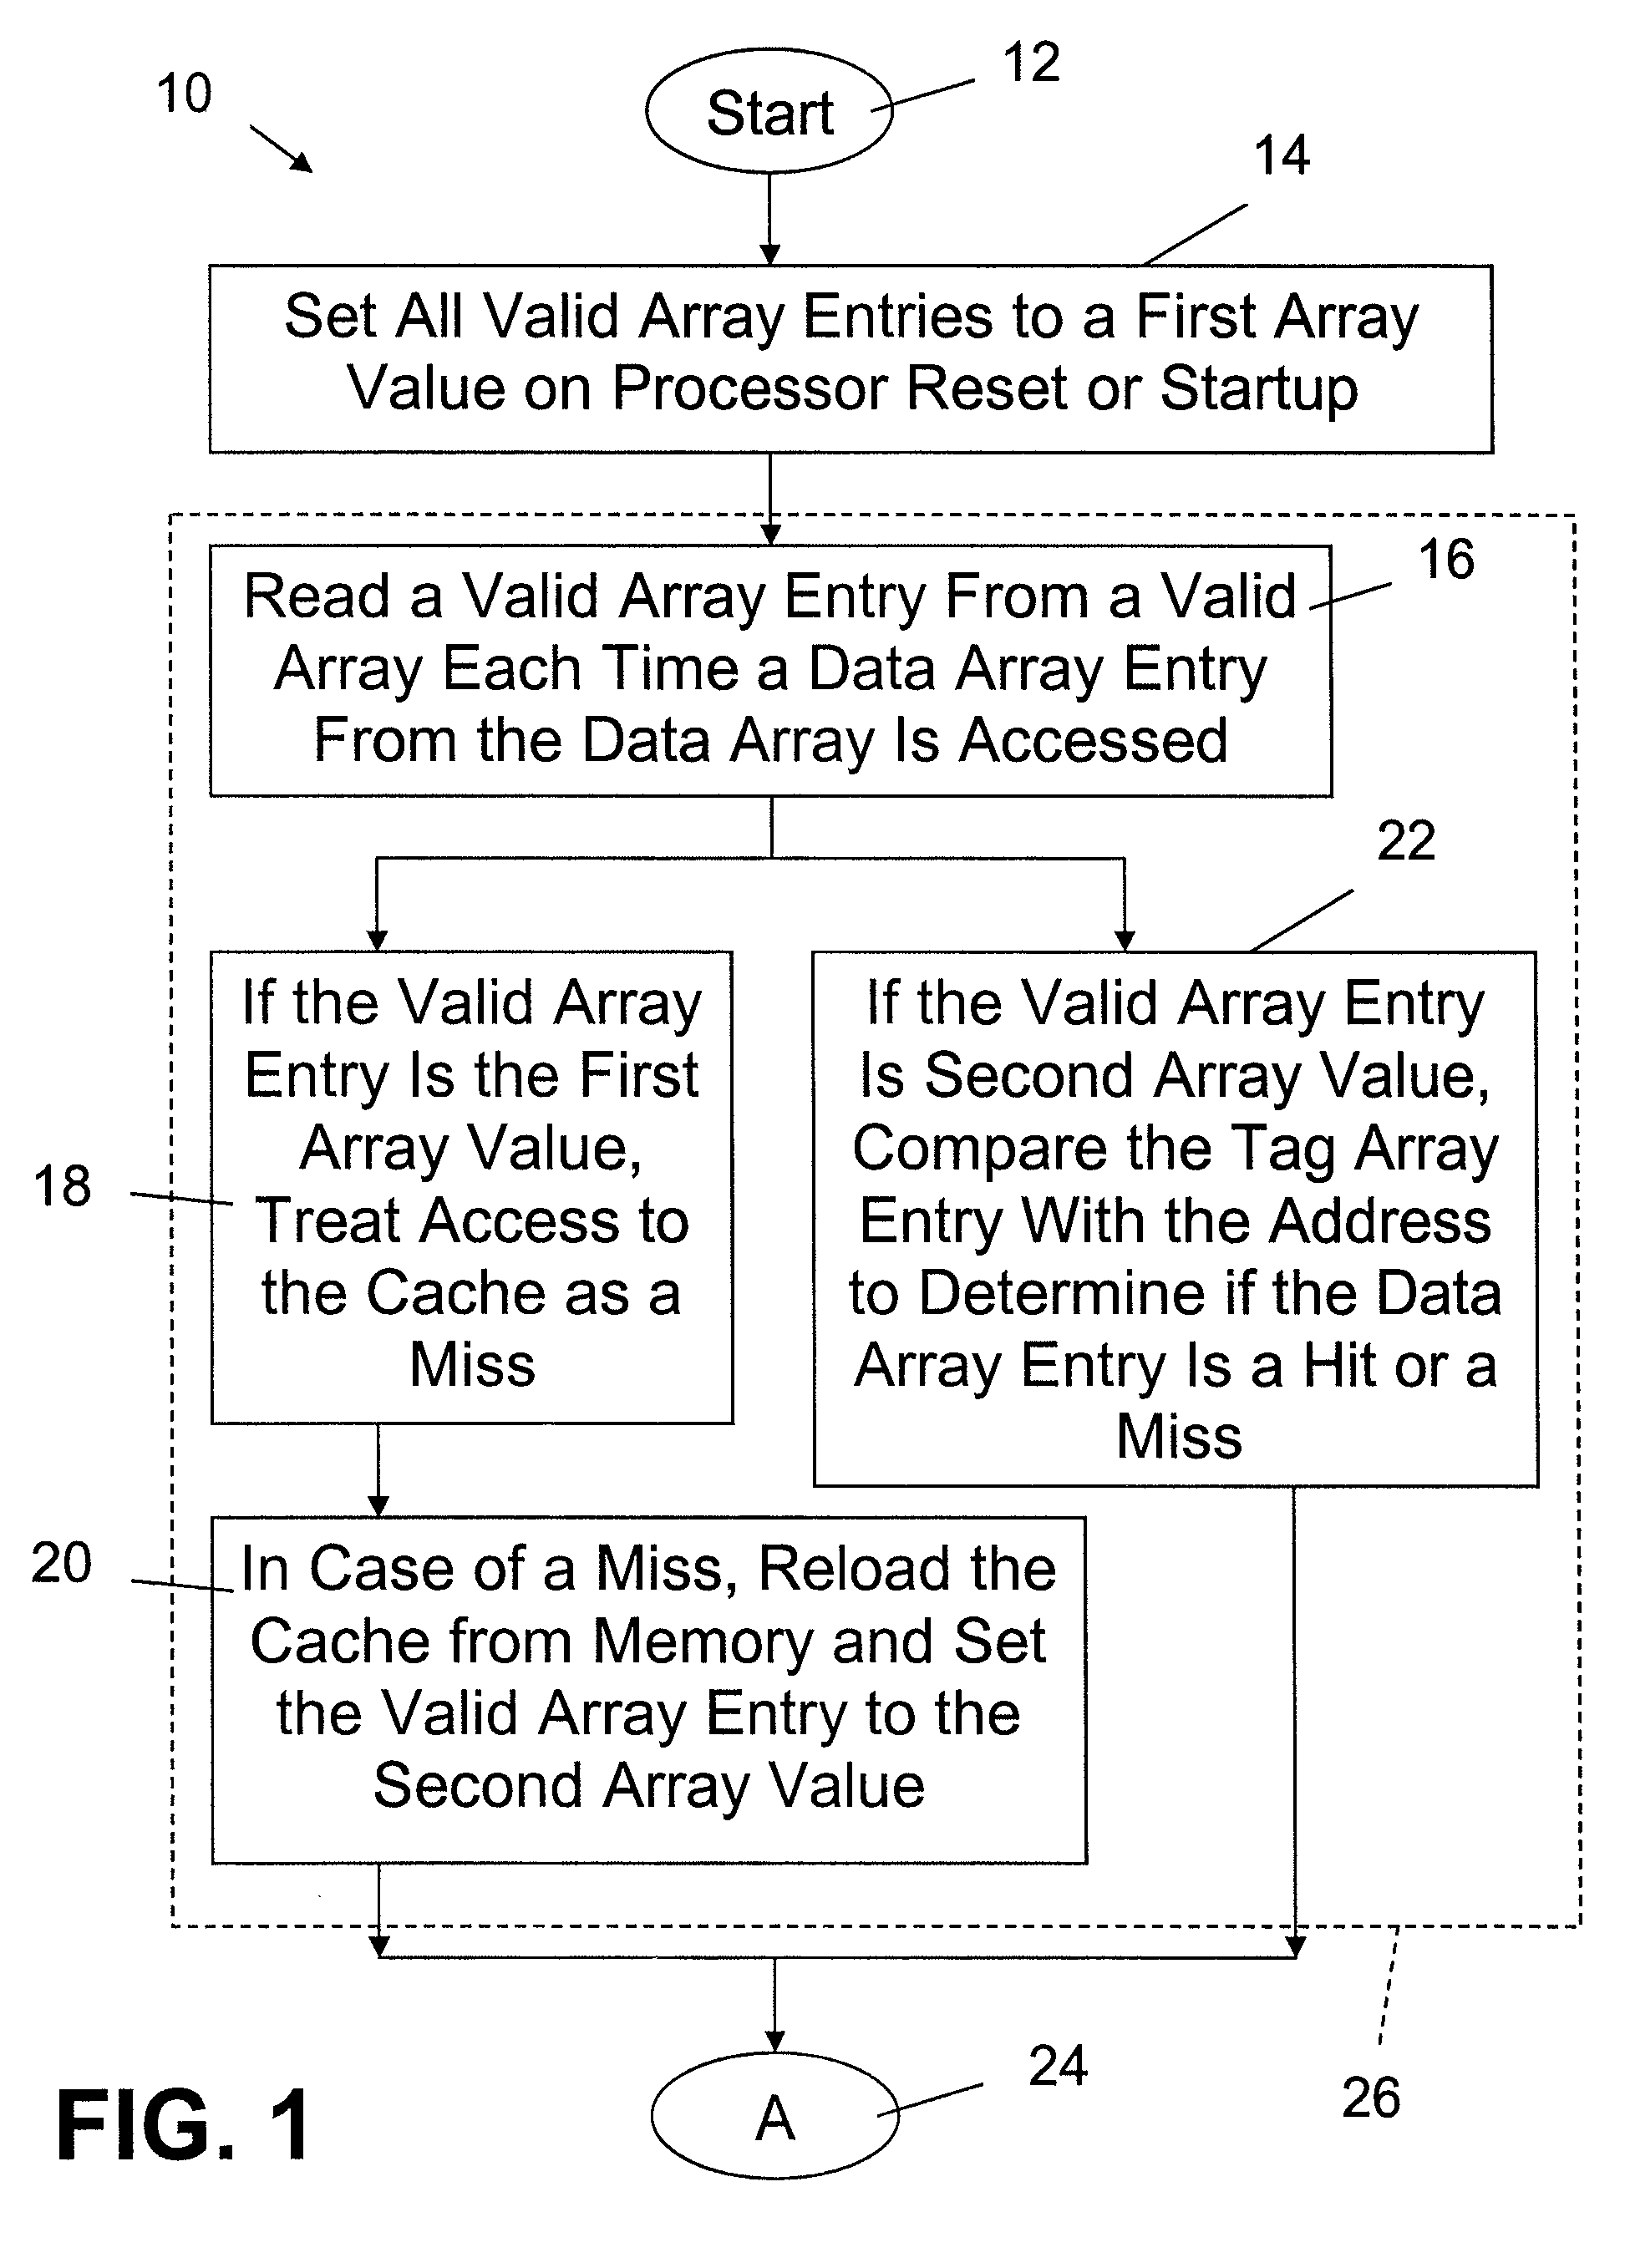 Method for achieving power savings by disabling a valid array